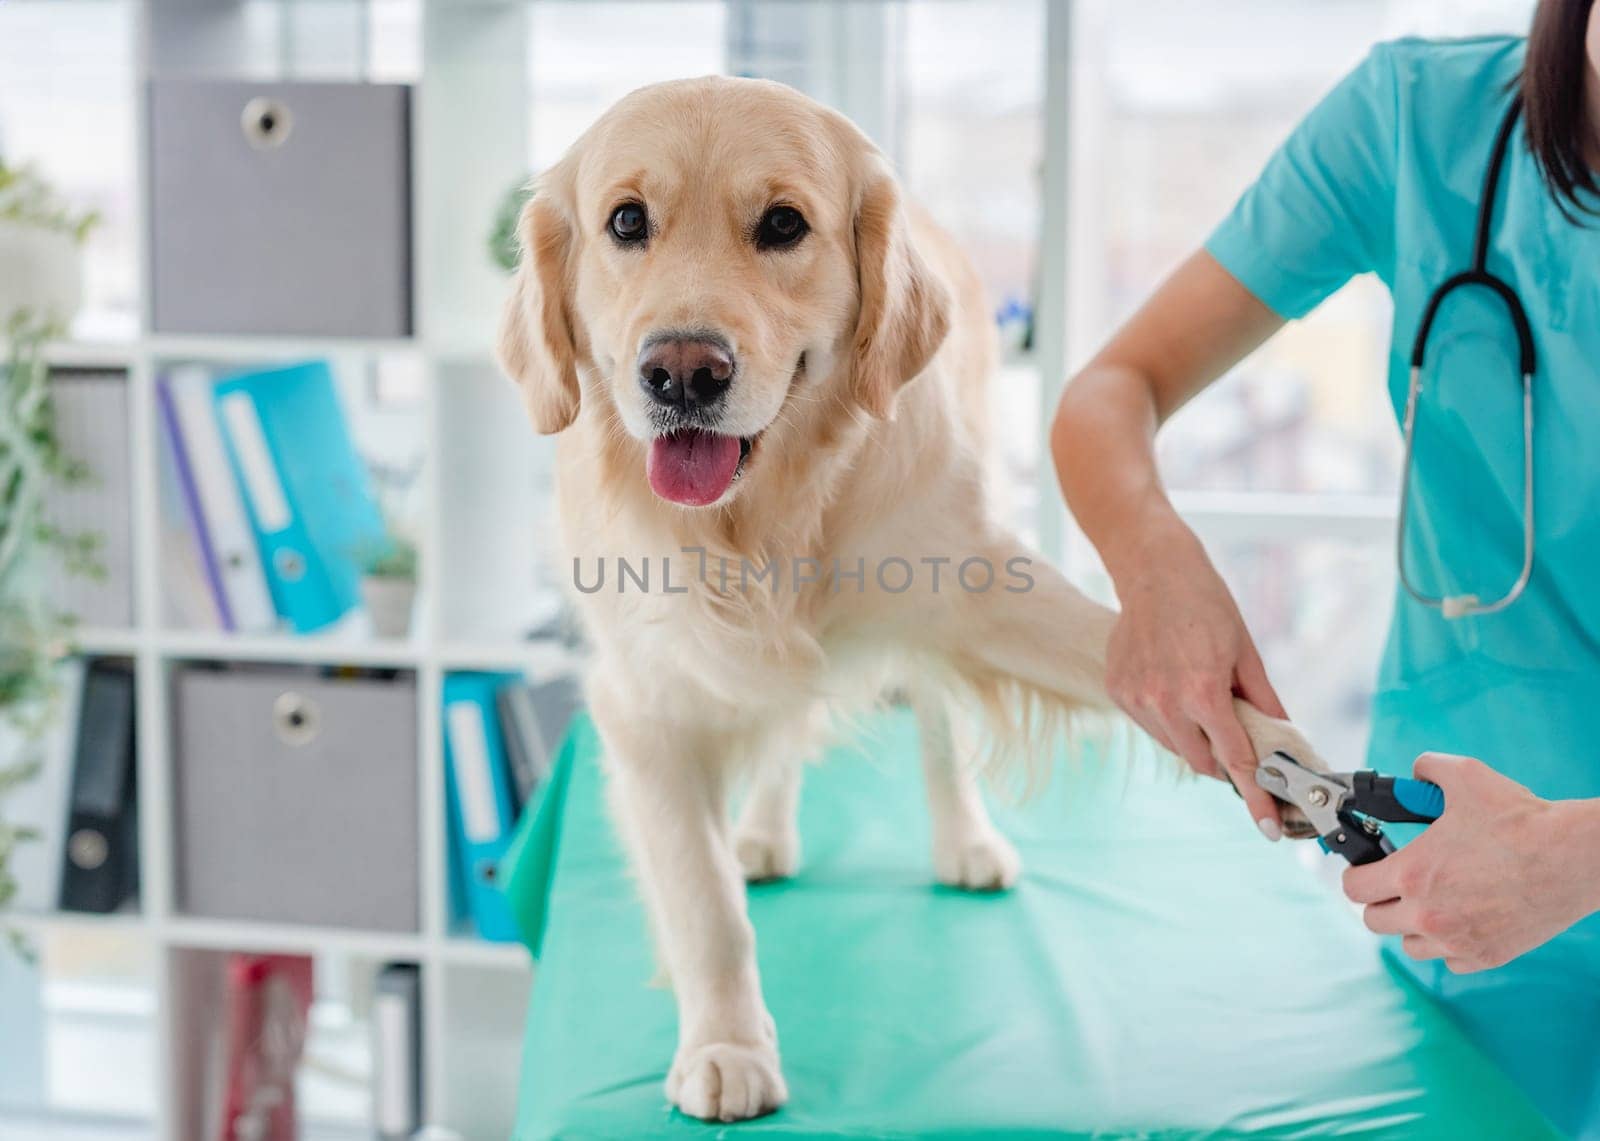 Veterinarian cutting claws of golden retriever dog during appointment in clinic